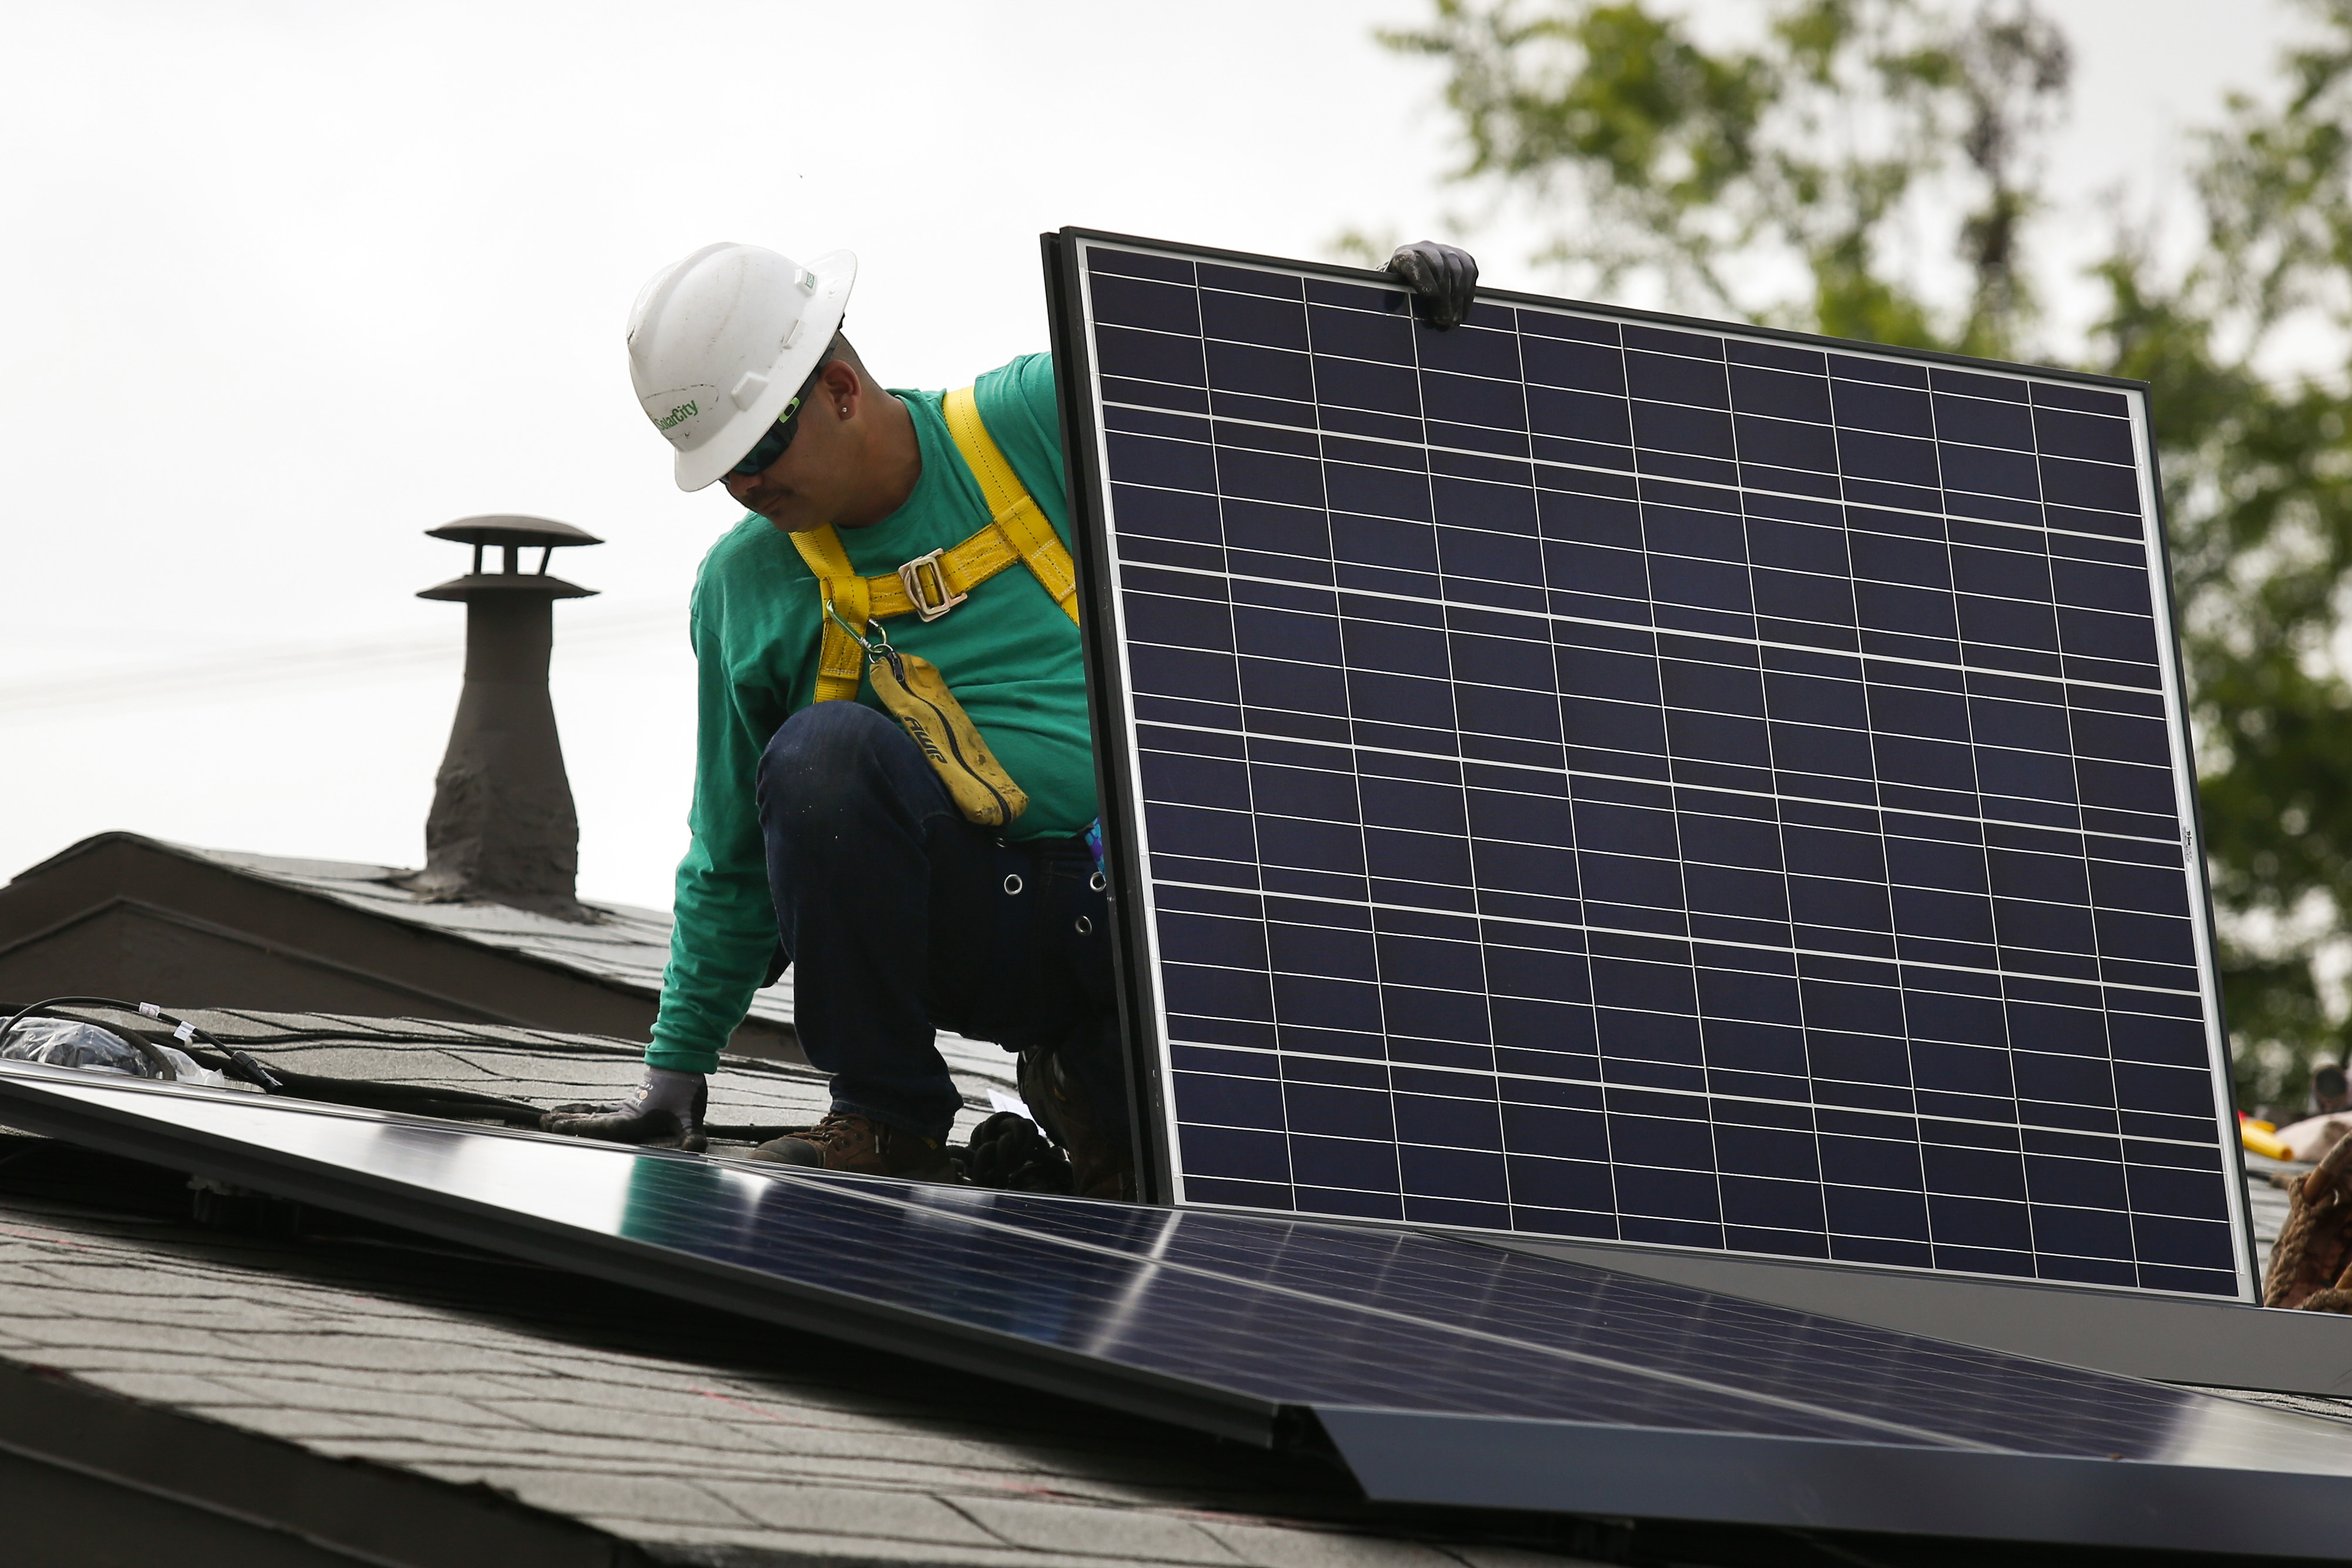 A SolarCity Installation As Earnings Figures Are Released